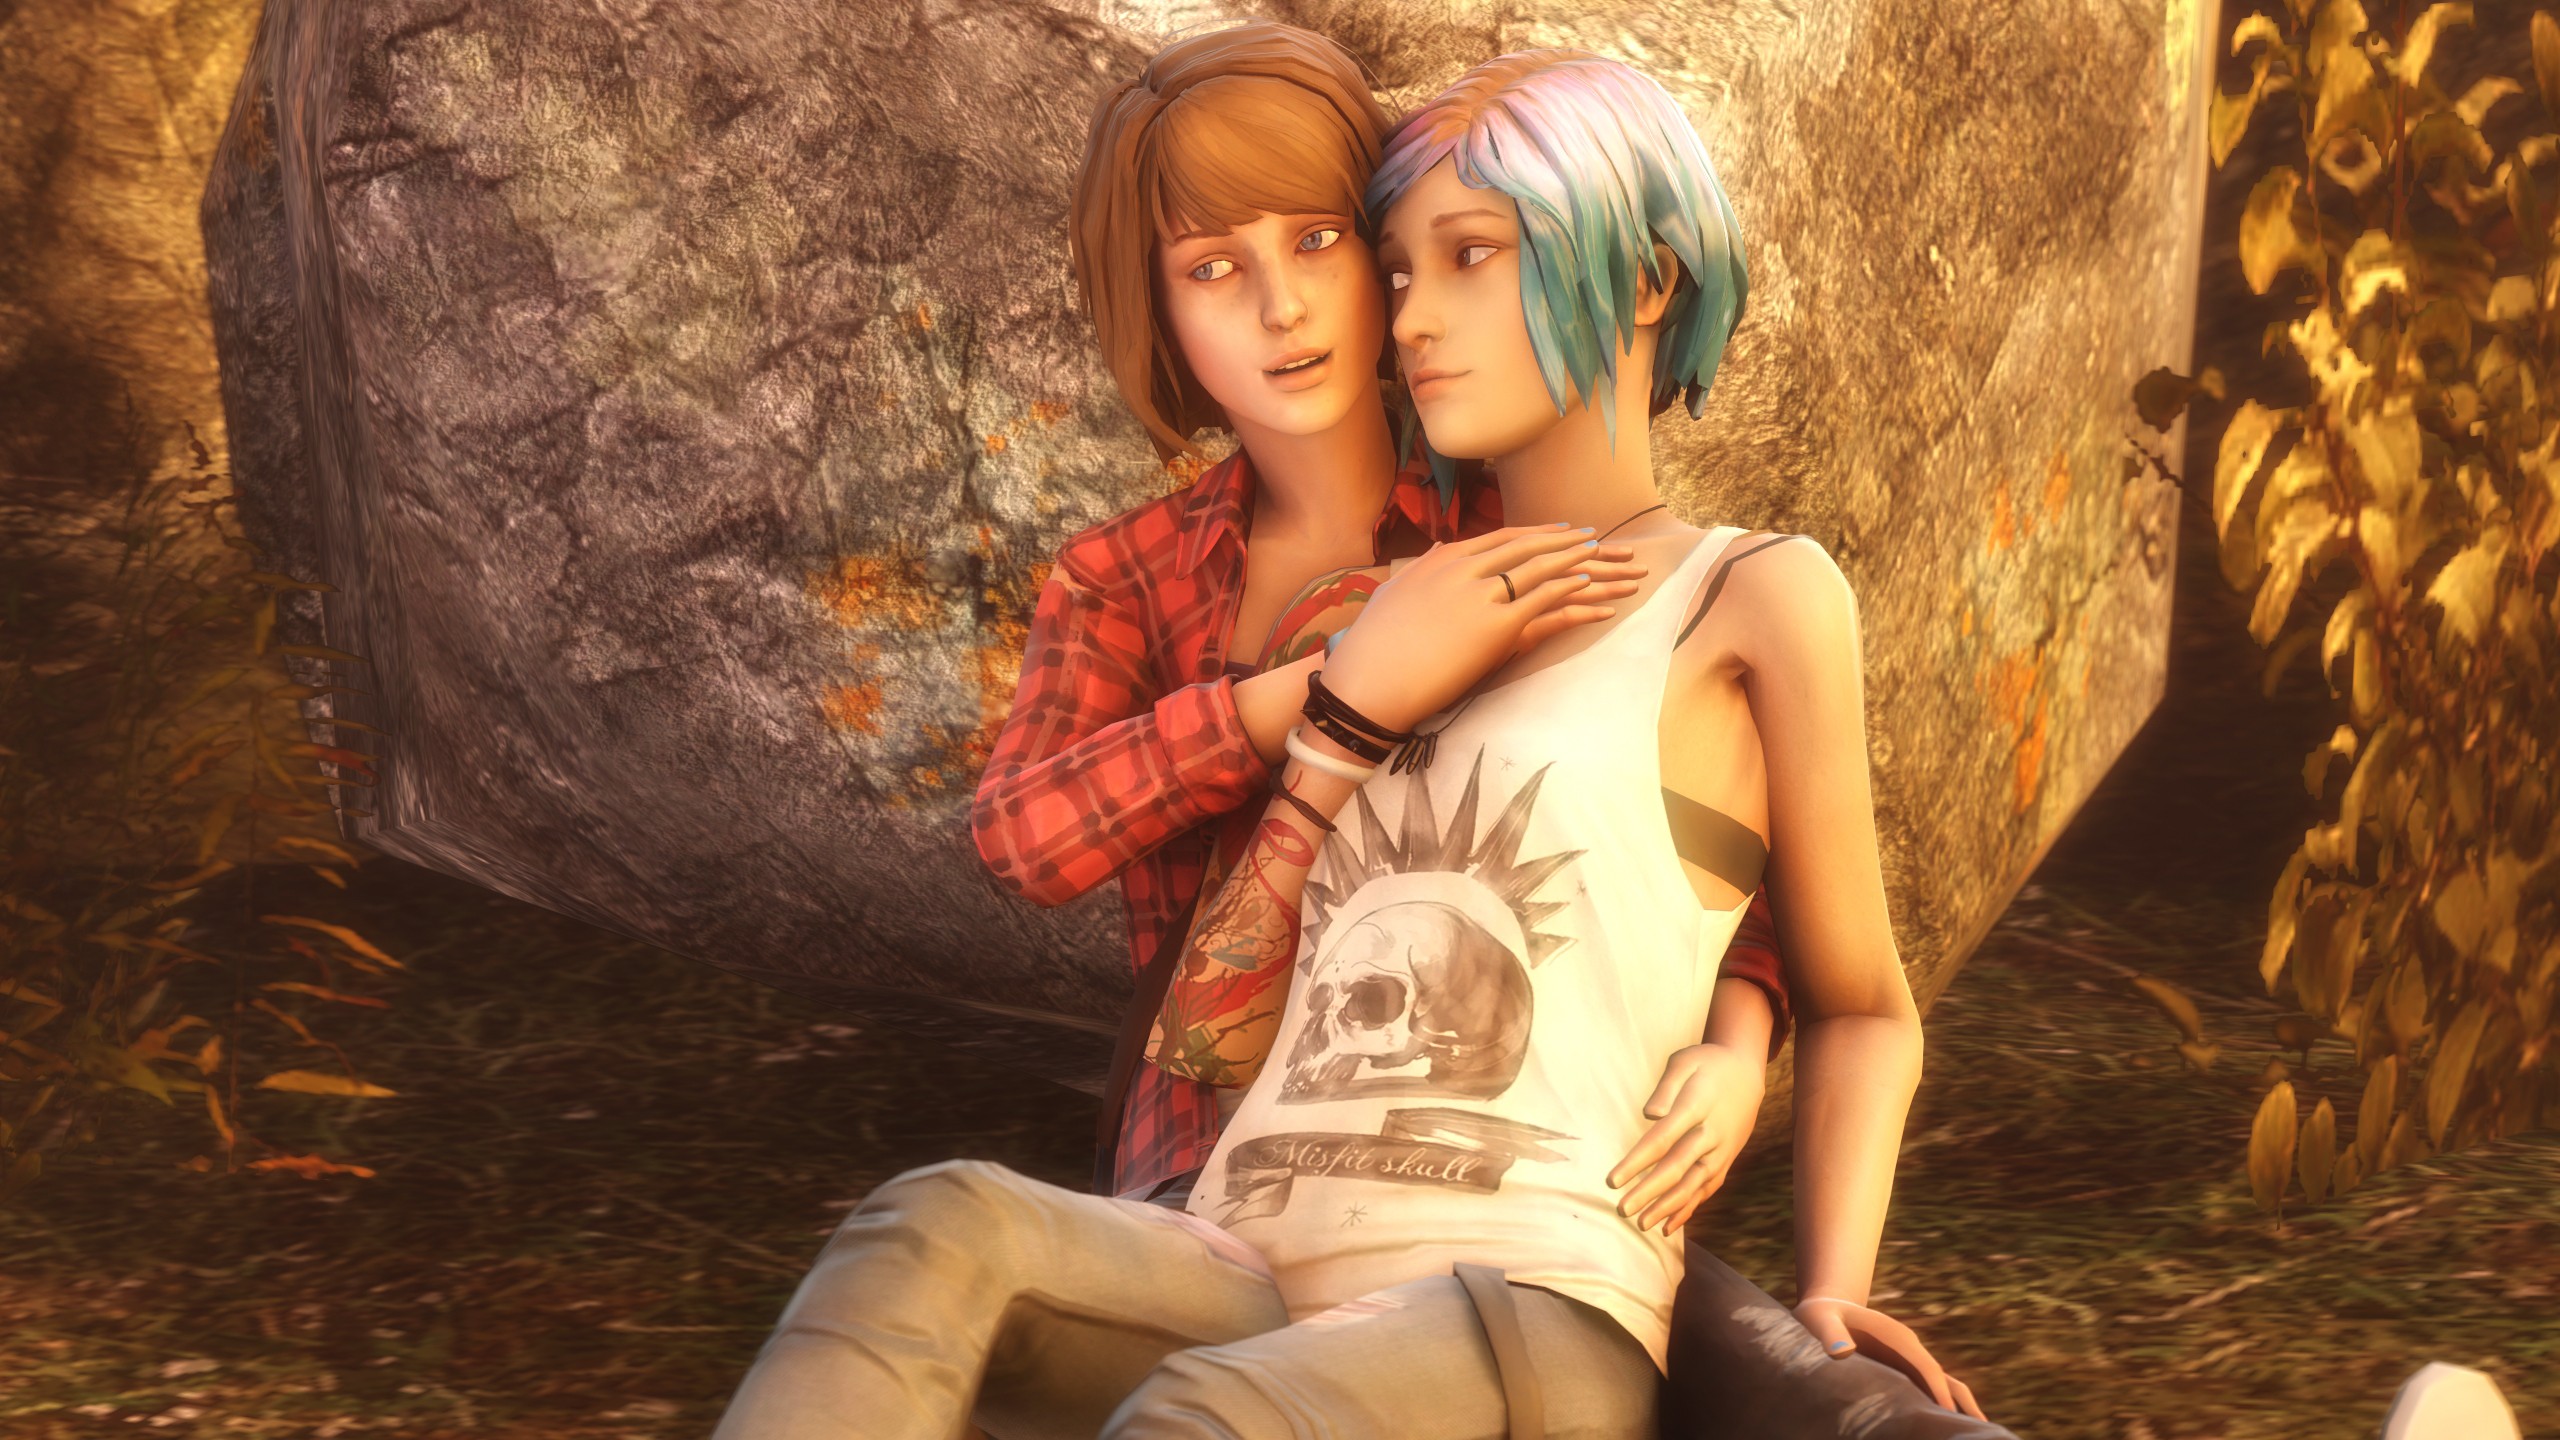 General 2560x1440 Life Is Strange Chloe Price Max Caulfield CGI lesbians two women video games PC gaming video game girls video game characters screen shot